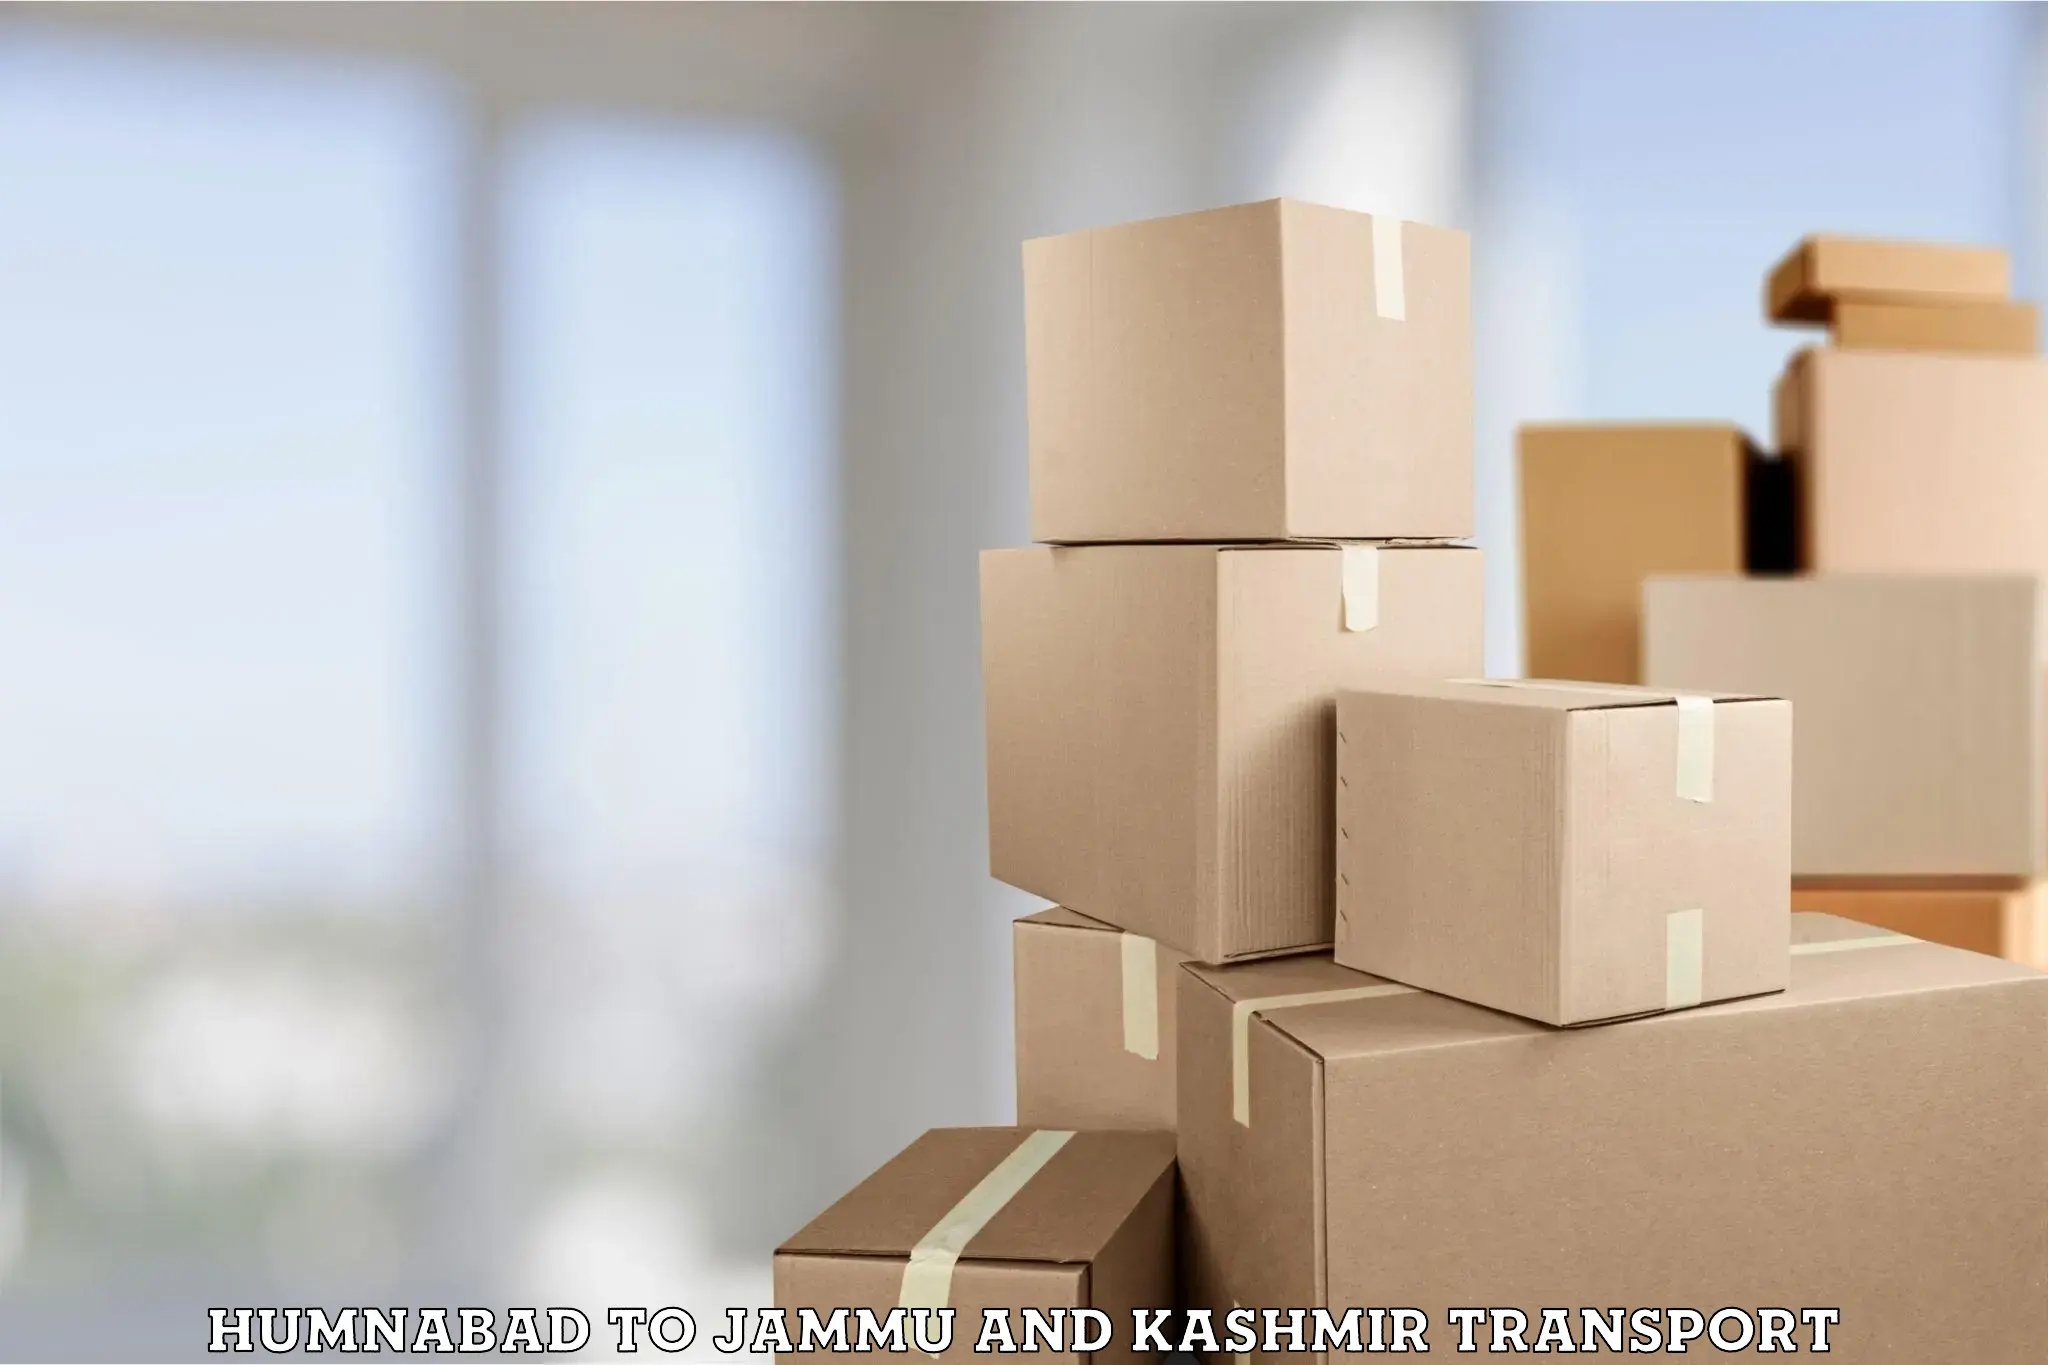 Truck transport companies in India Humnabad to Leh